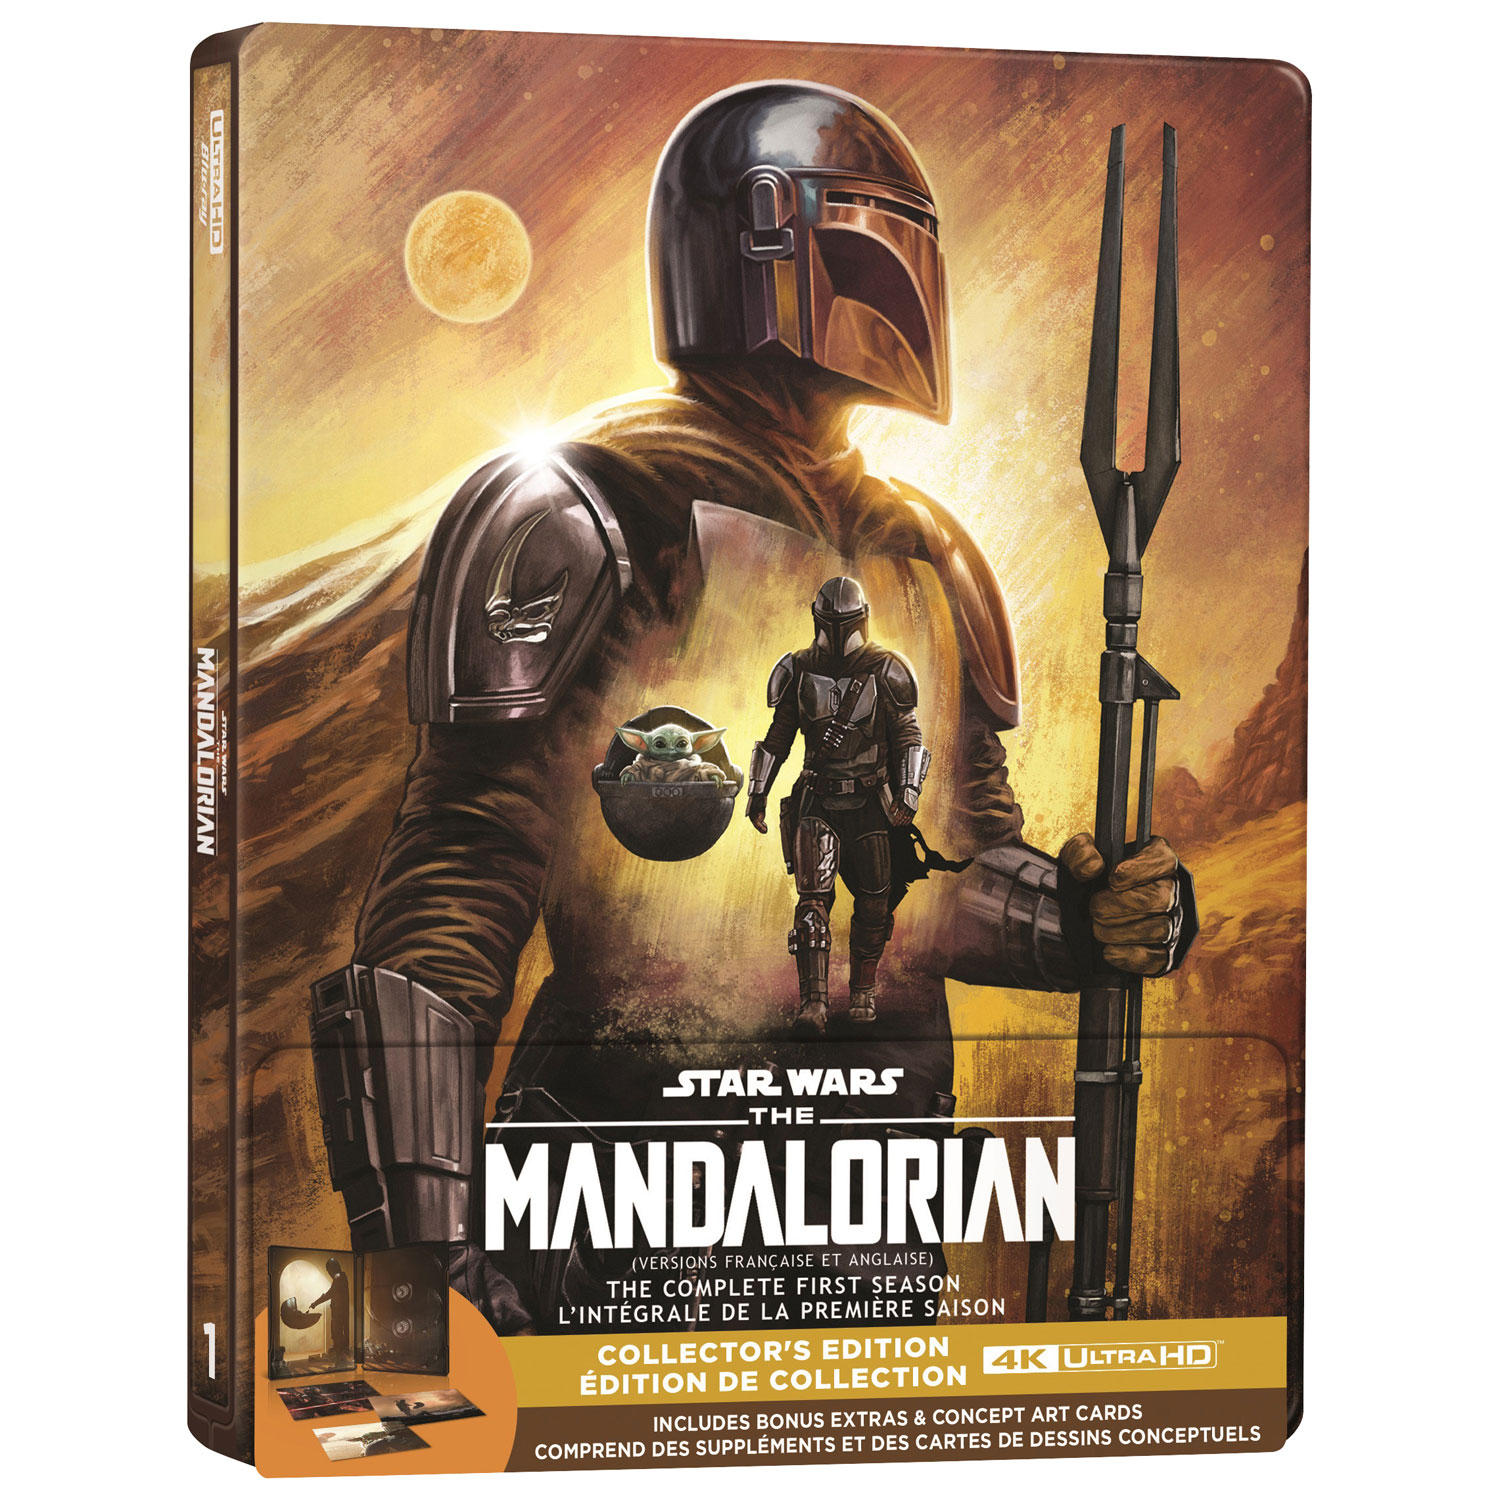 The Mandalorian: The Complete First Season (Collector's Edition) (SteelBook) (4K Ultra HD)